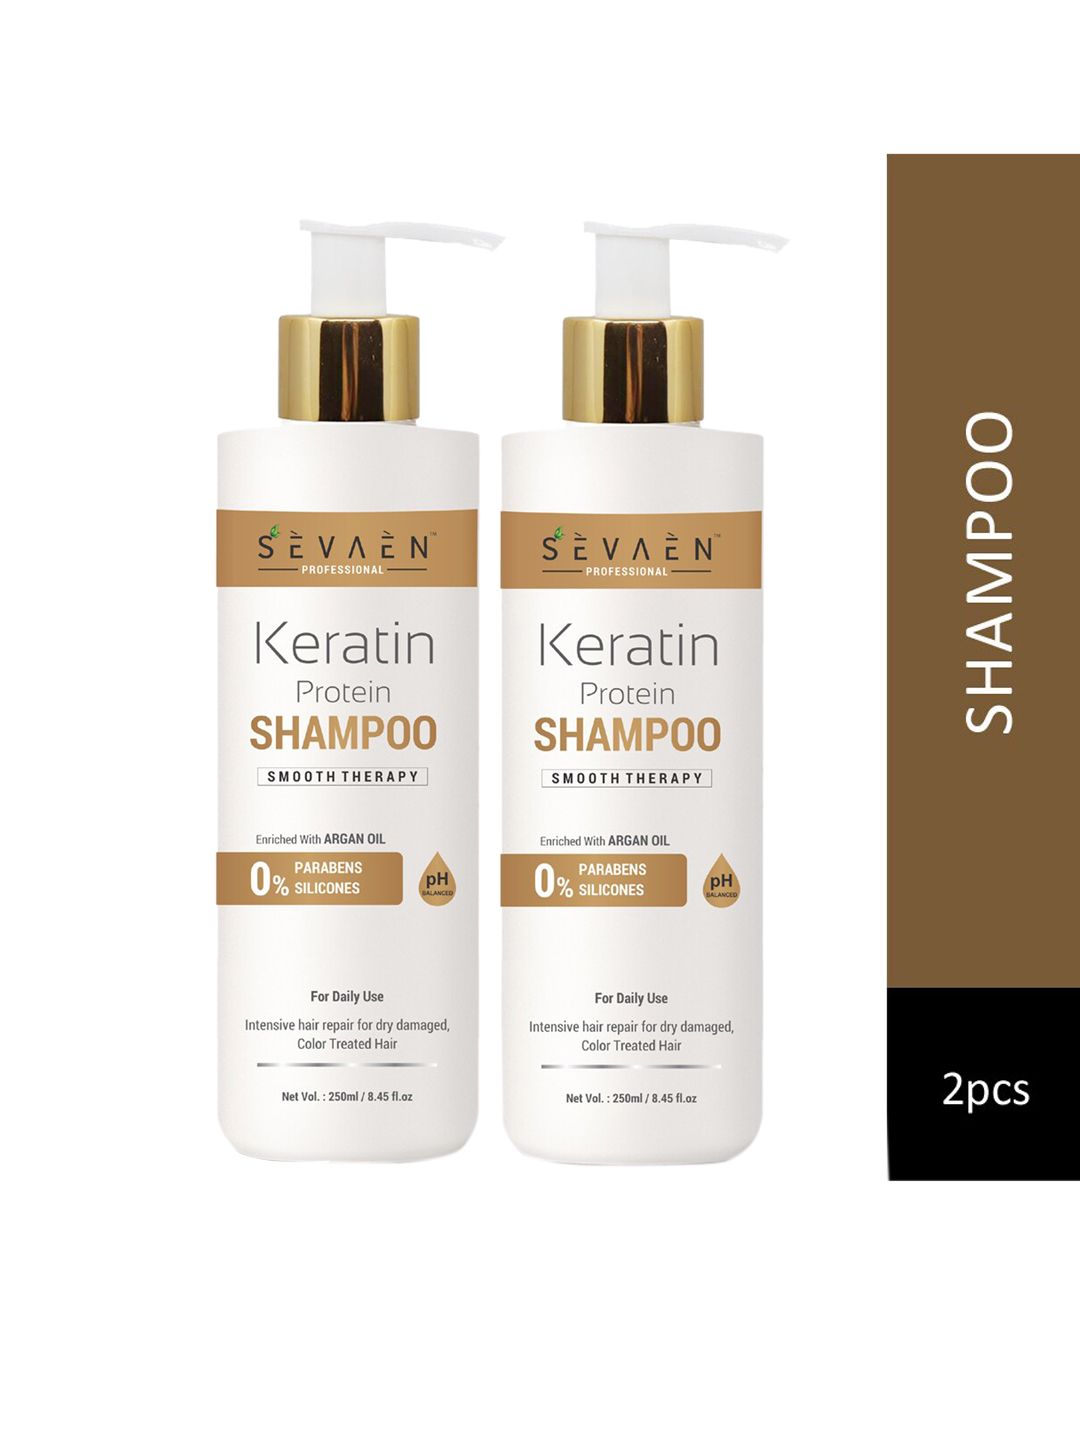 SEVAEN Set of 2 Smooth Therapy Keratin Protein Shampoos with Argan Oil - 250ml each Price in India